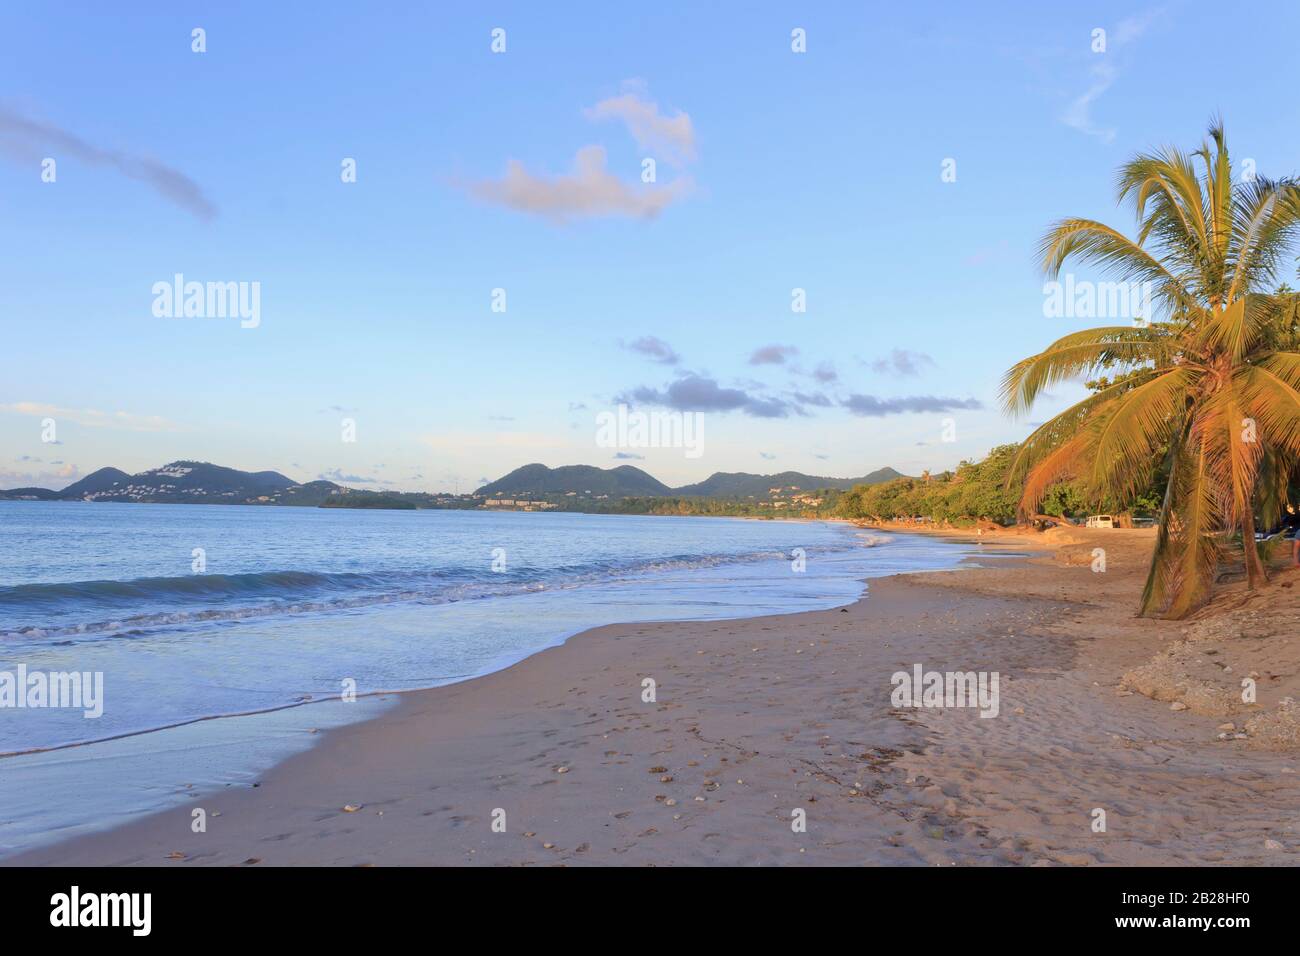 Vigie beach at sunrise, gentle wave from the blue sea, the green covered hills yonder, palm and almond trees lit yellow from the rising sun Stock Photo